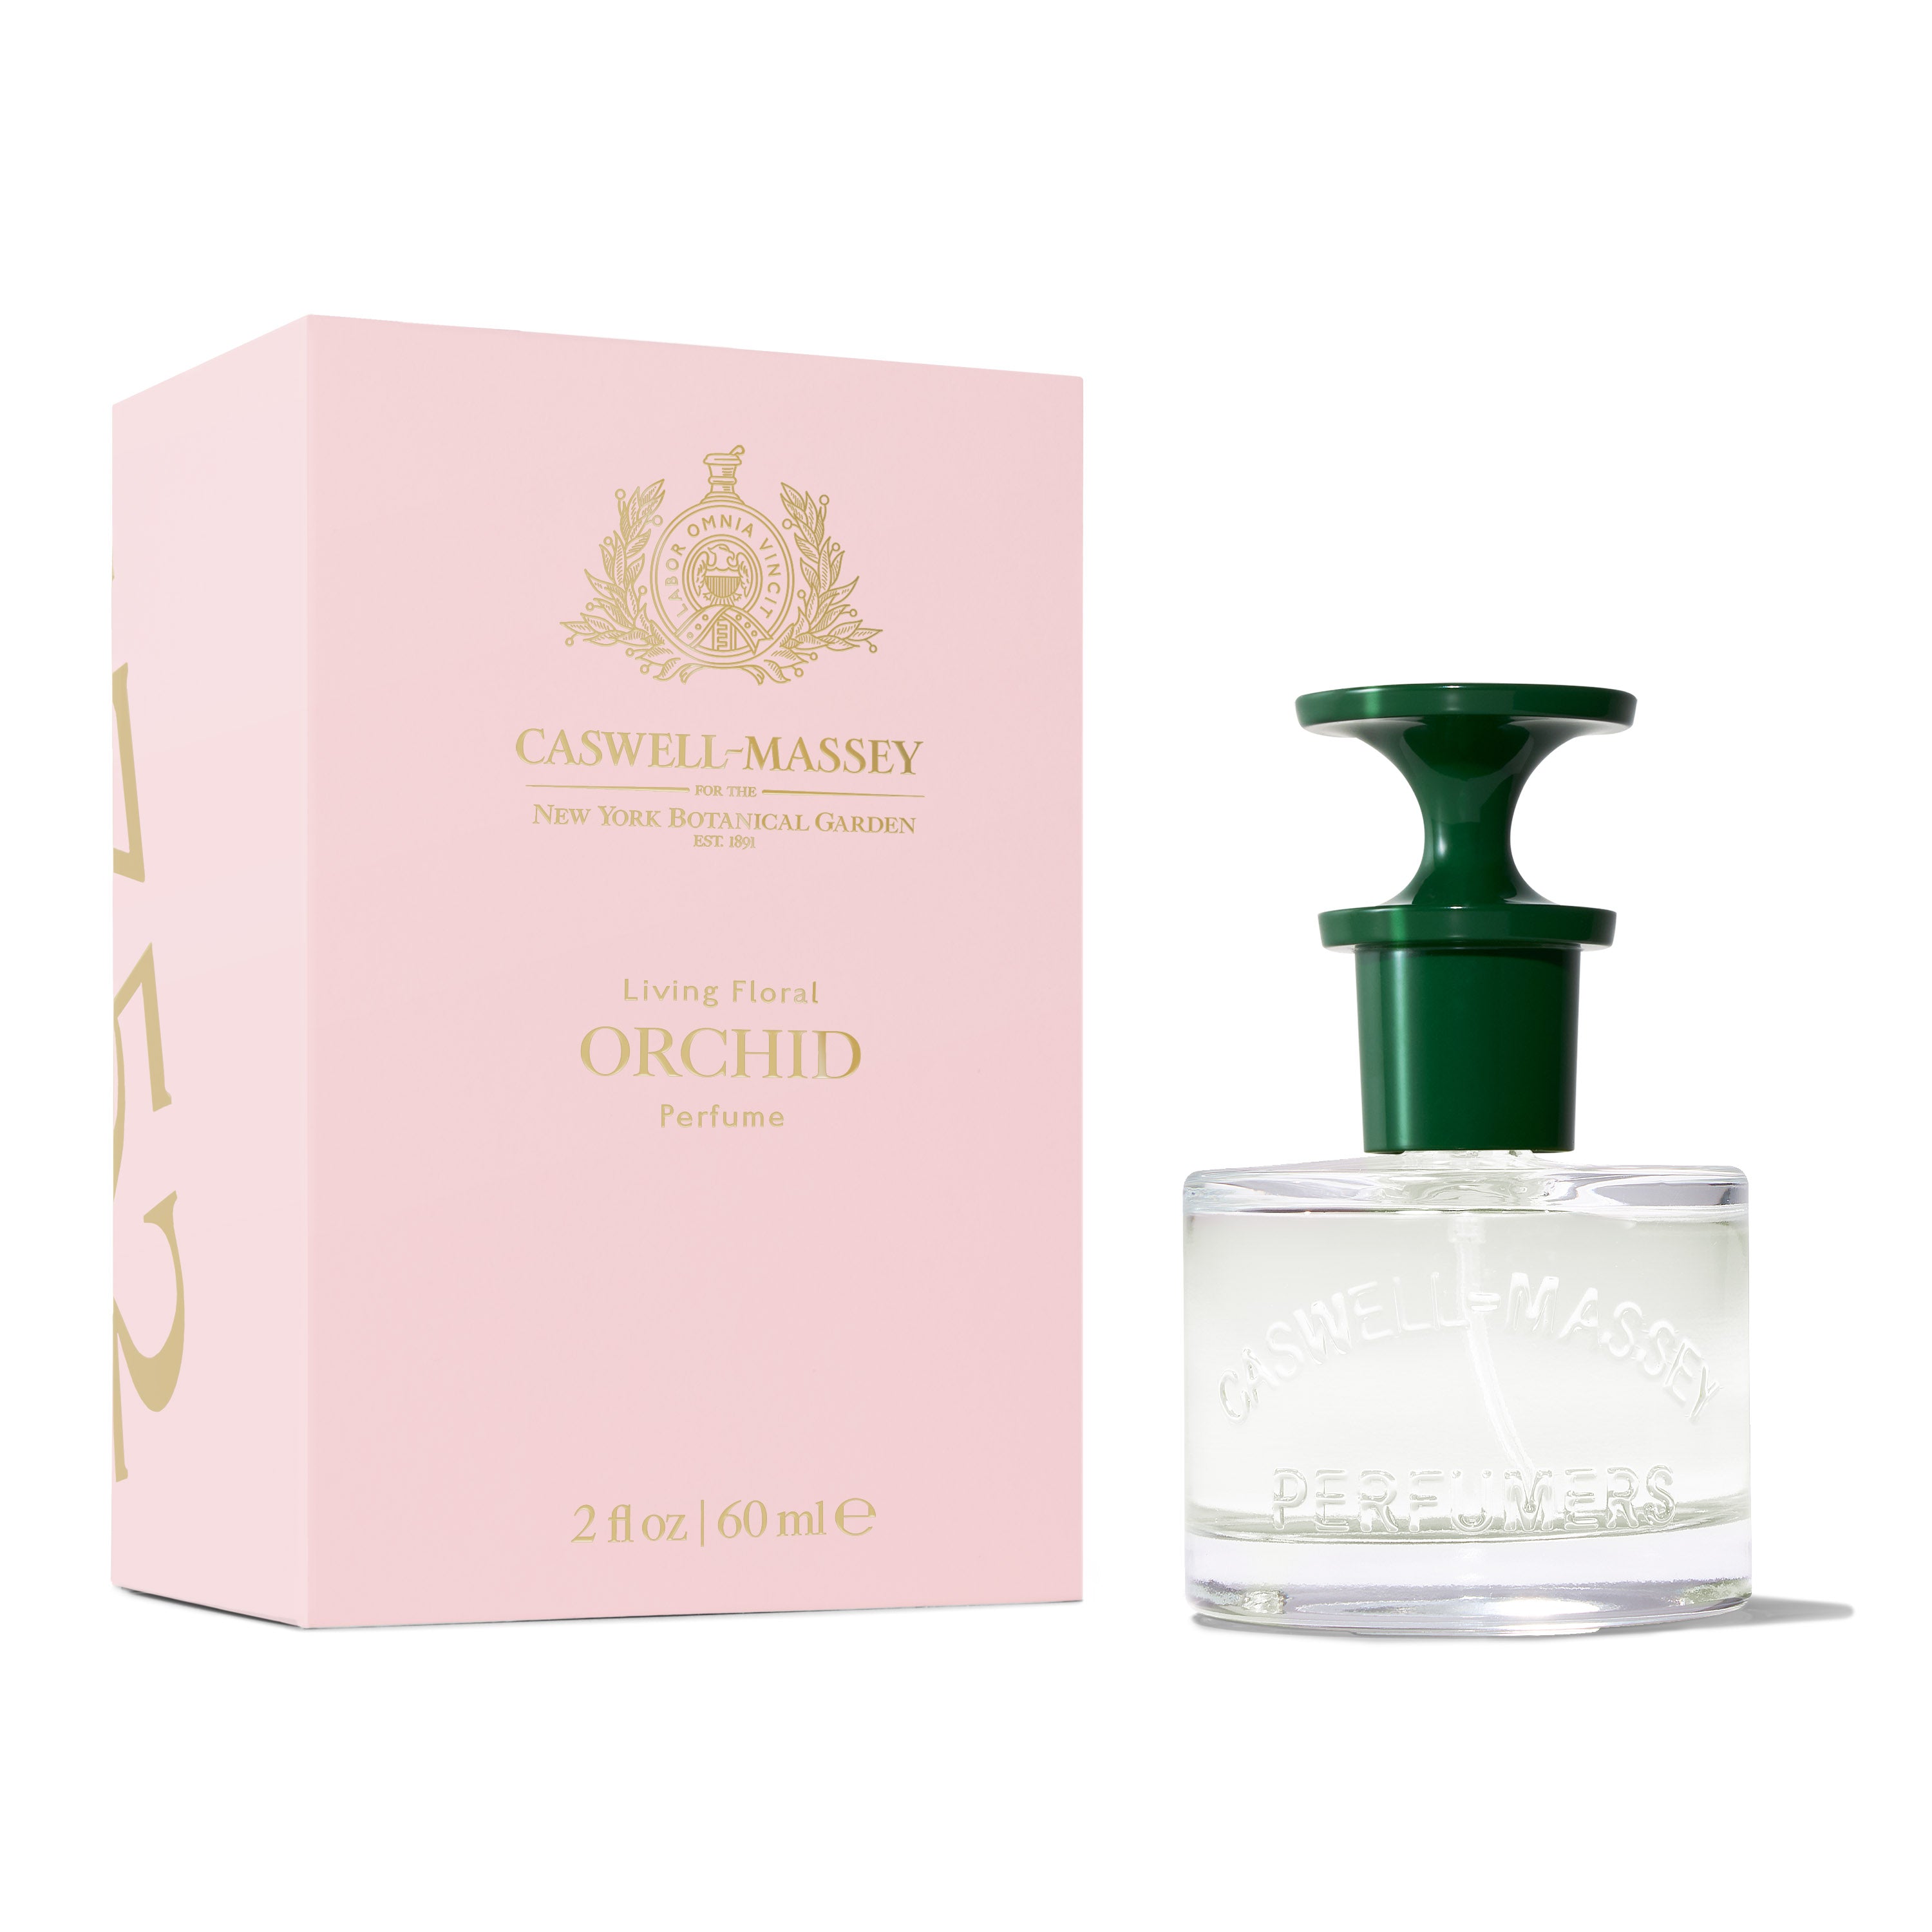 Orchid Perfume 60ml, Fine Fragrance by Caswell-Massey shown with light pink box